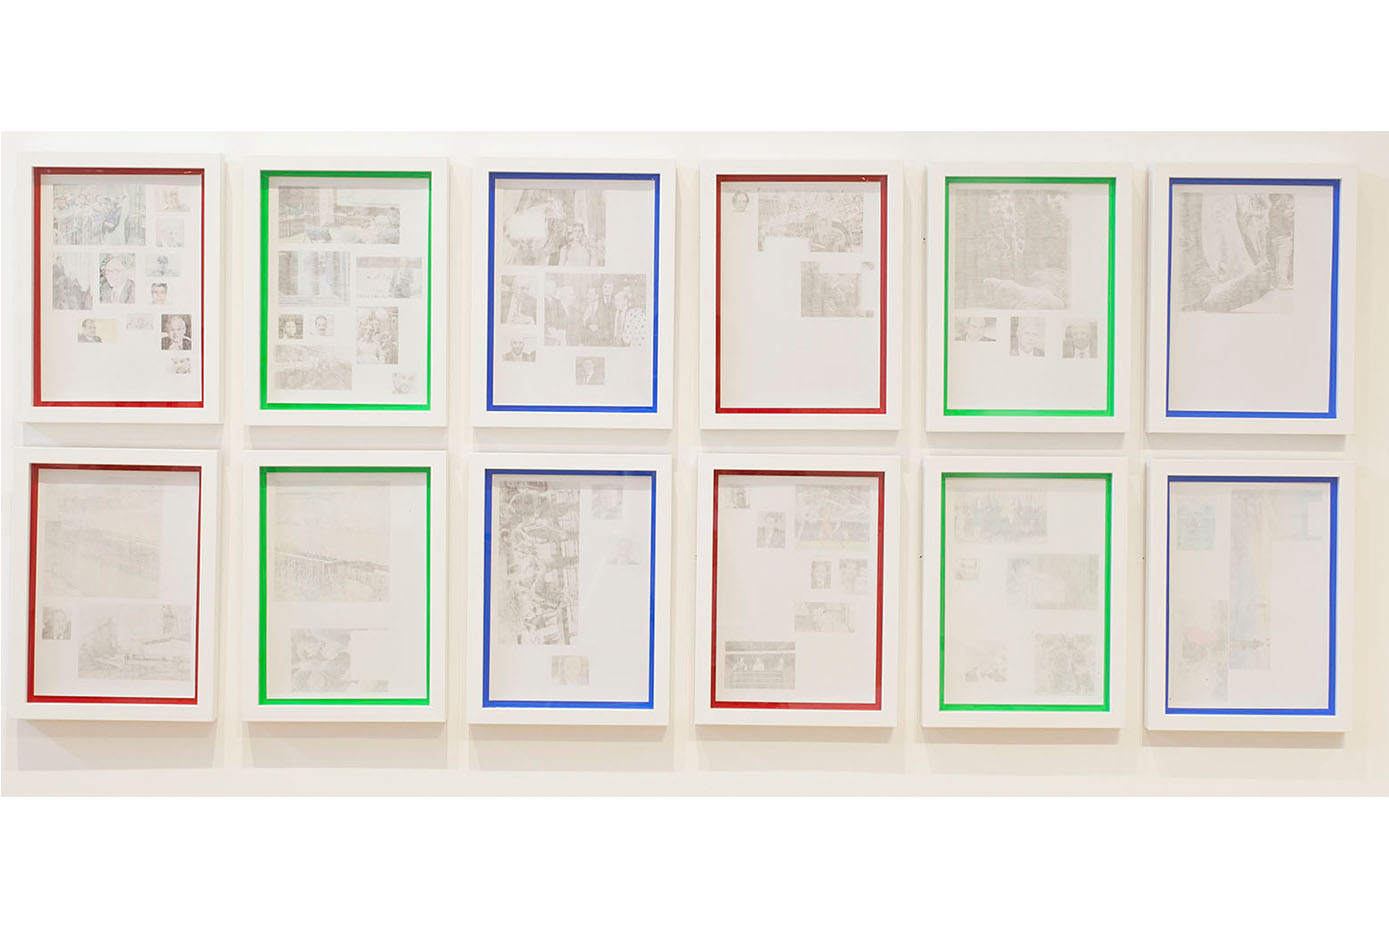  Taha Belal  Untitled (pictures backwards) , 2014 Newspaper ink transfer on inkjet photo paper |&nbsp;each panel: 11.5 x 8.5 inches /&nbsp;installed dimension: 29 x 68 x 1.5 inches | HG12538 